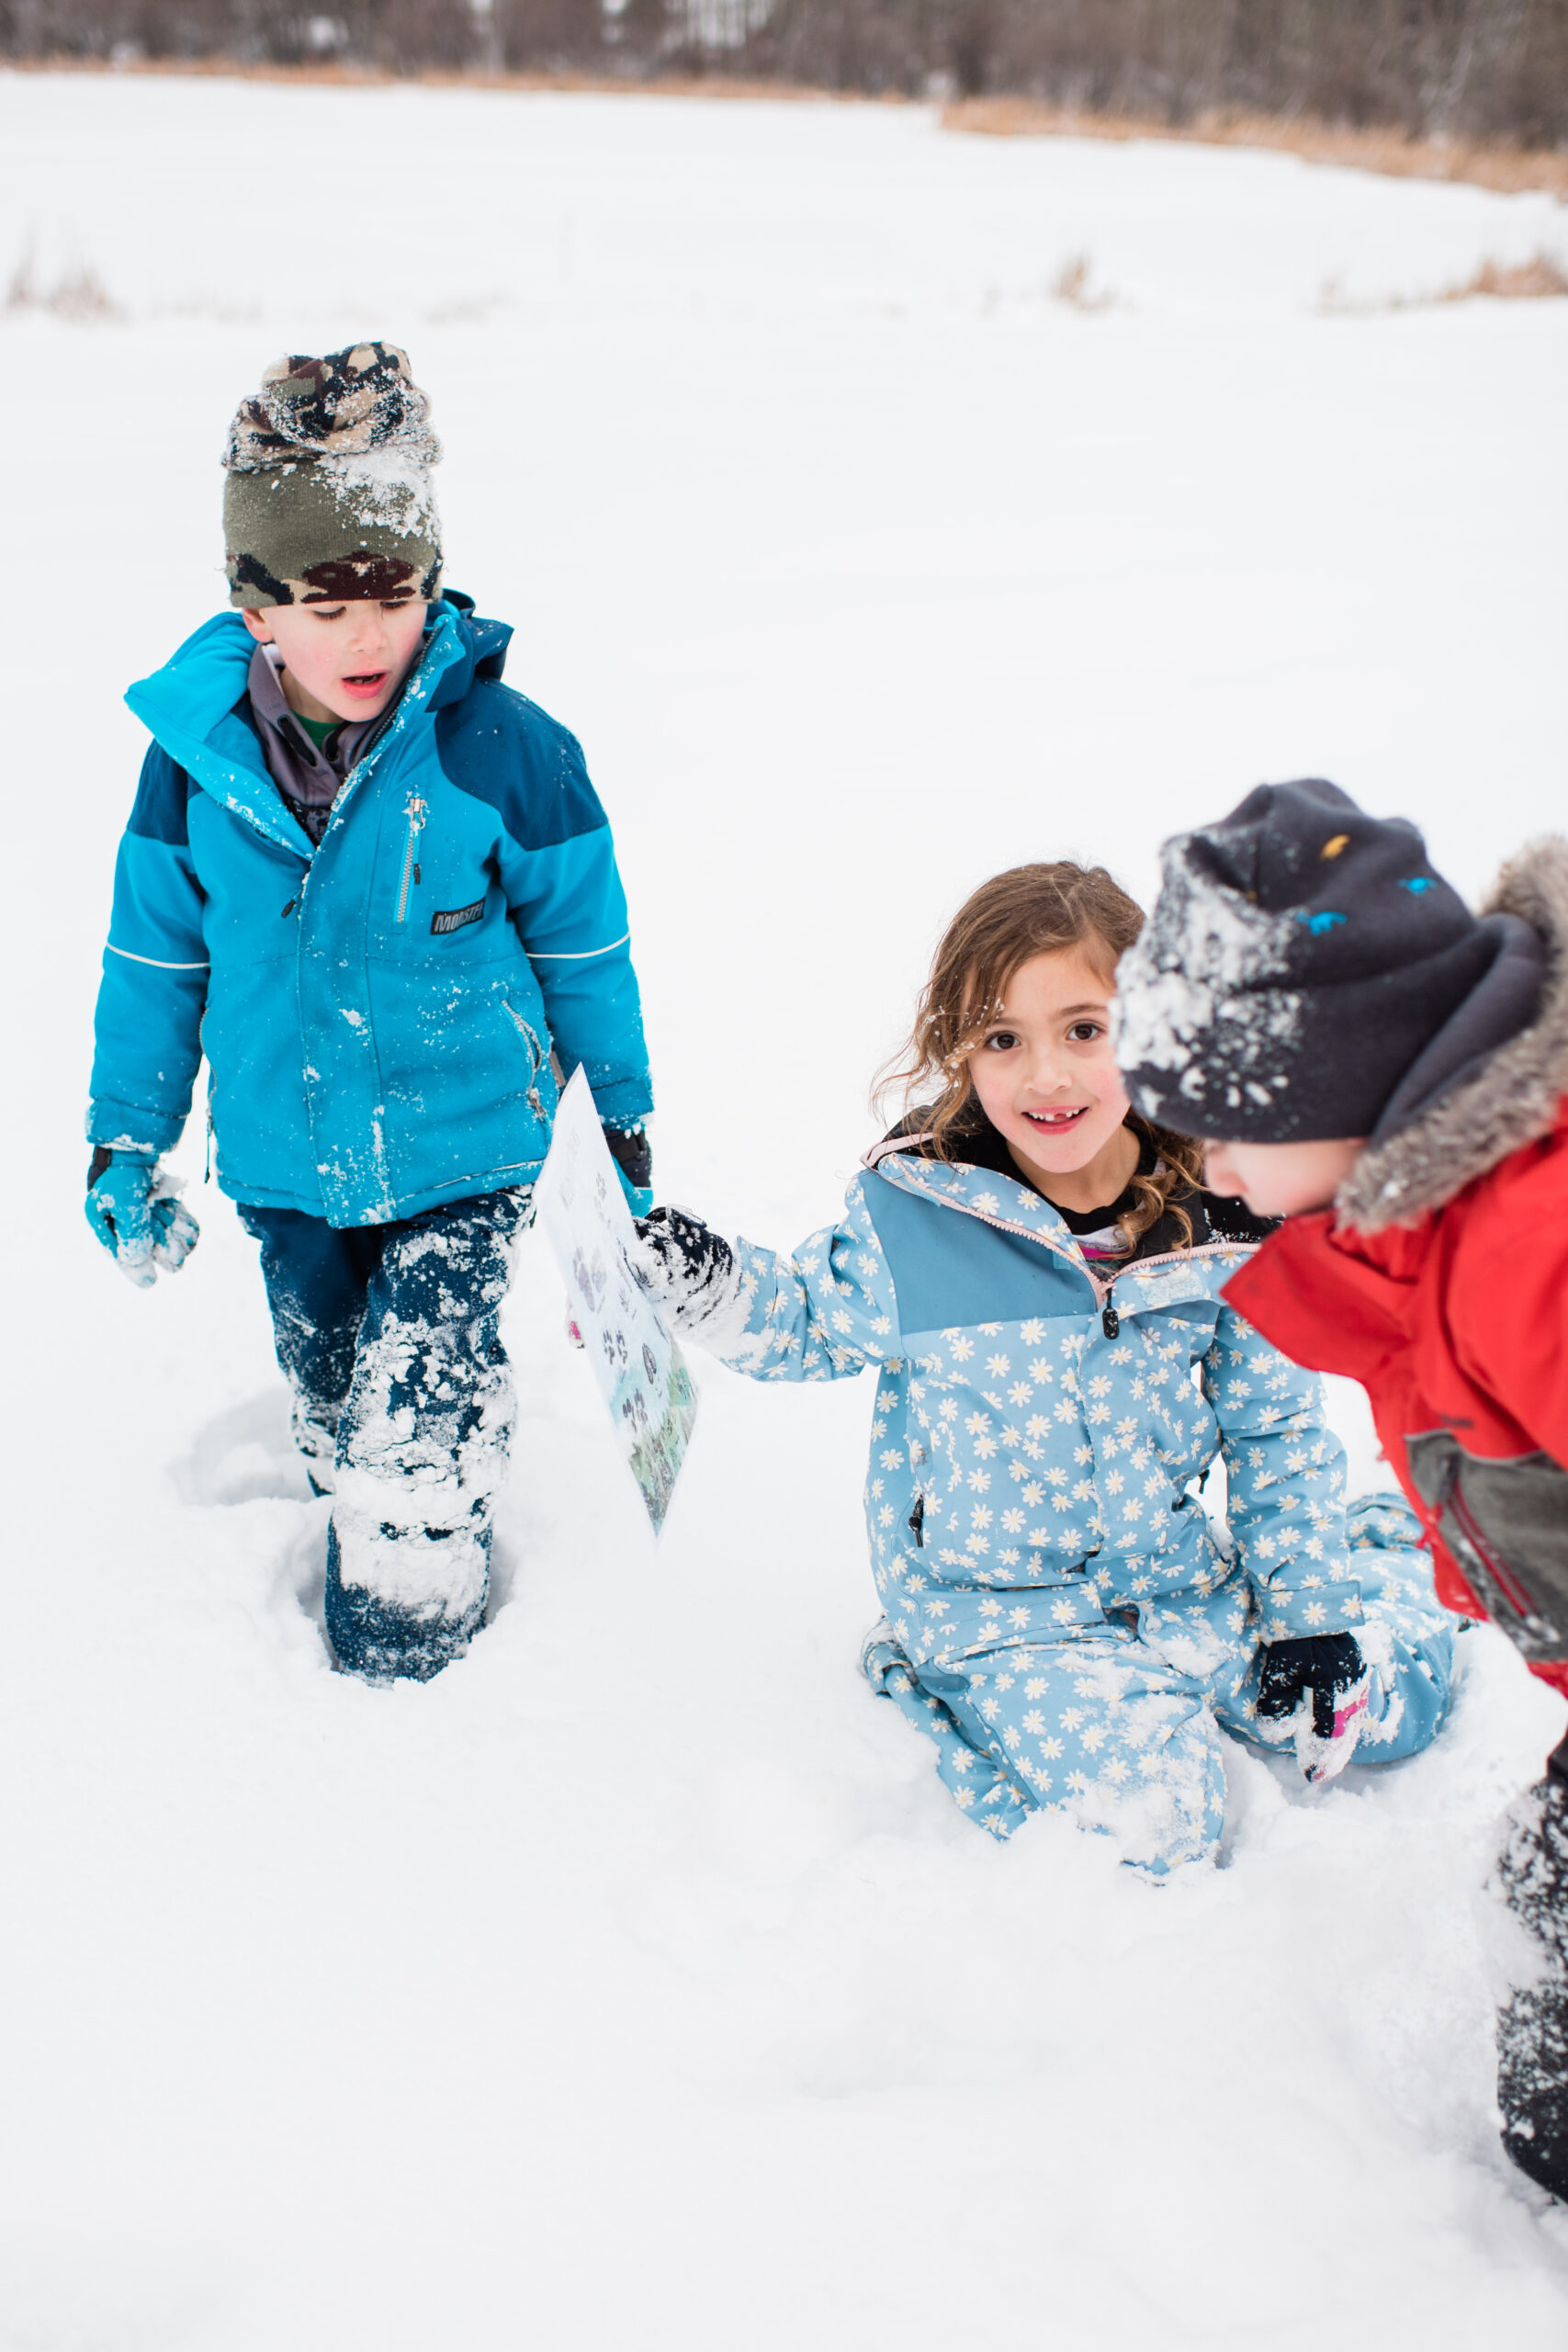 three kids in snow gear looking at an animal footprint in the snow